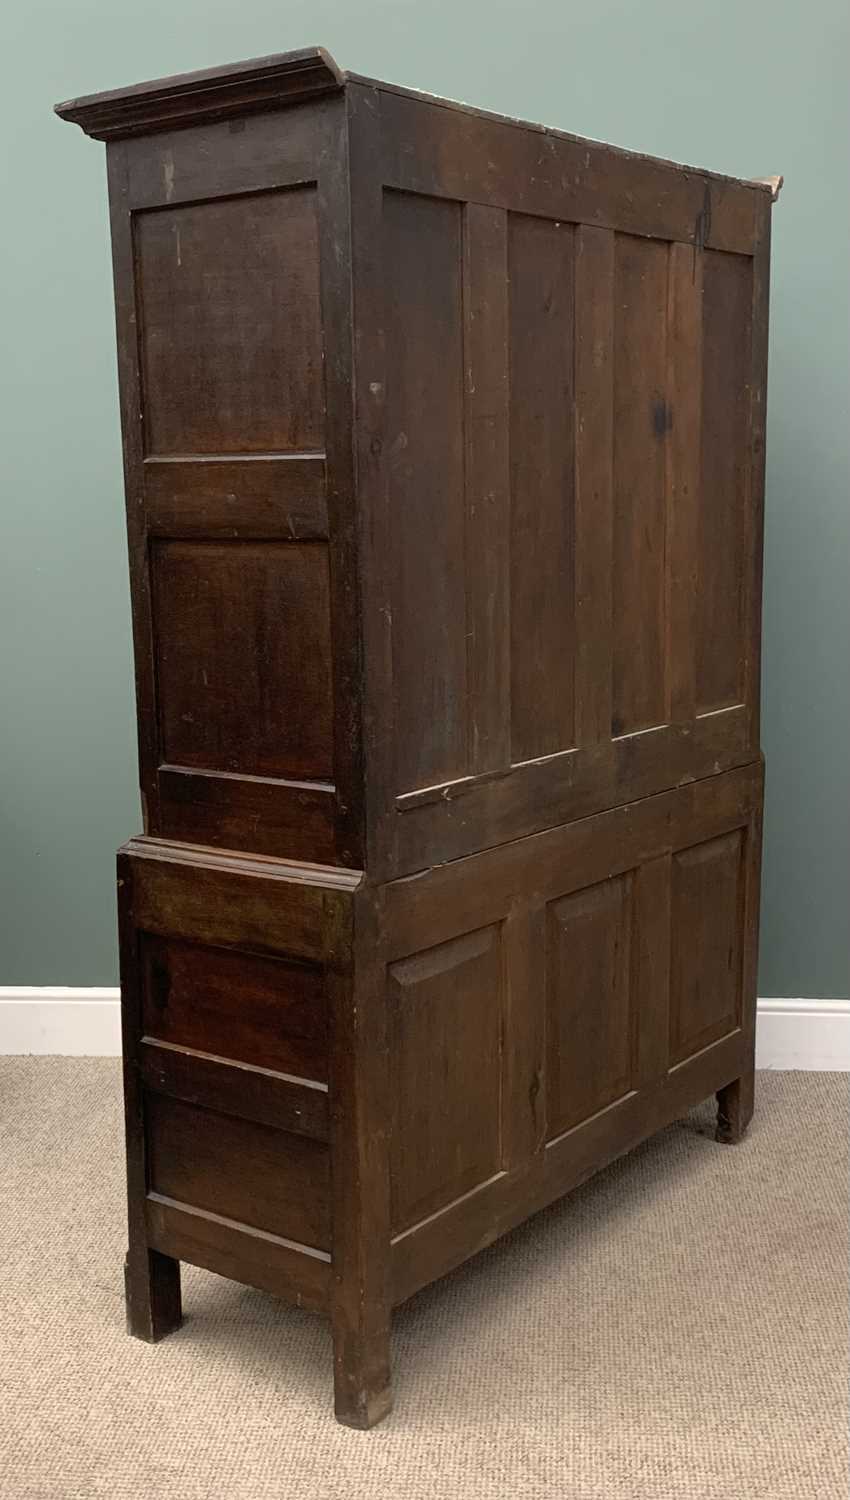 19th CENTURY WELSH OAK PRESS CUPBOARD having two opening doors with fielded panels over a base of - Image 5 of 6